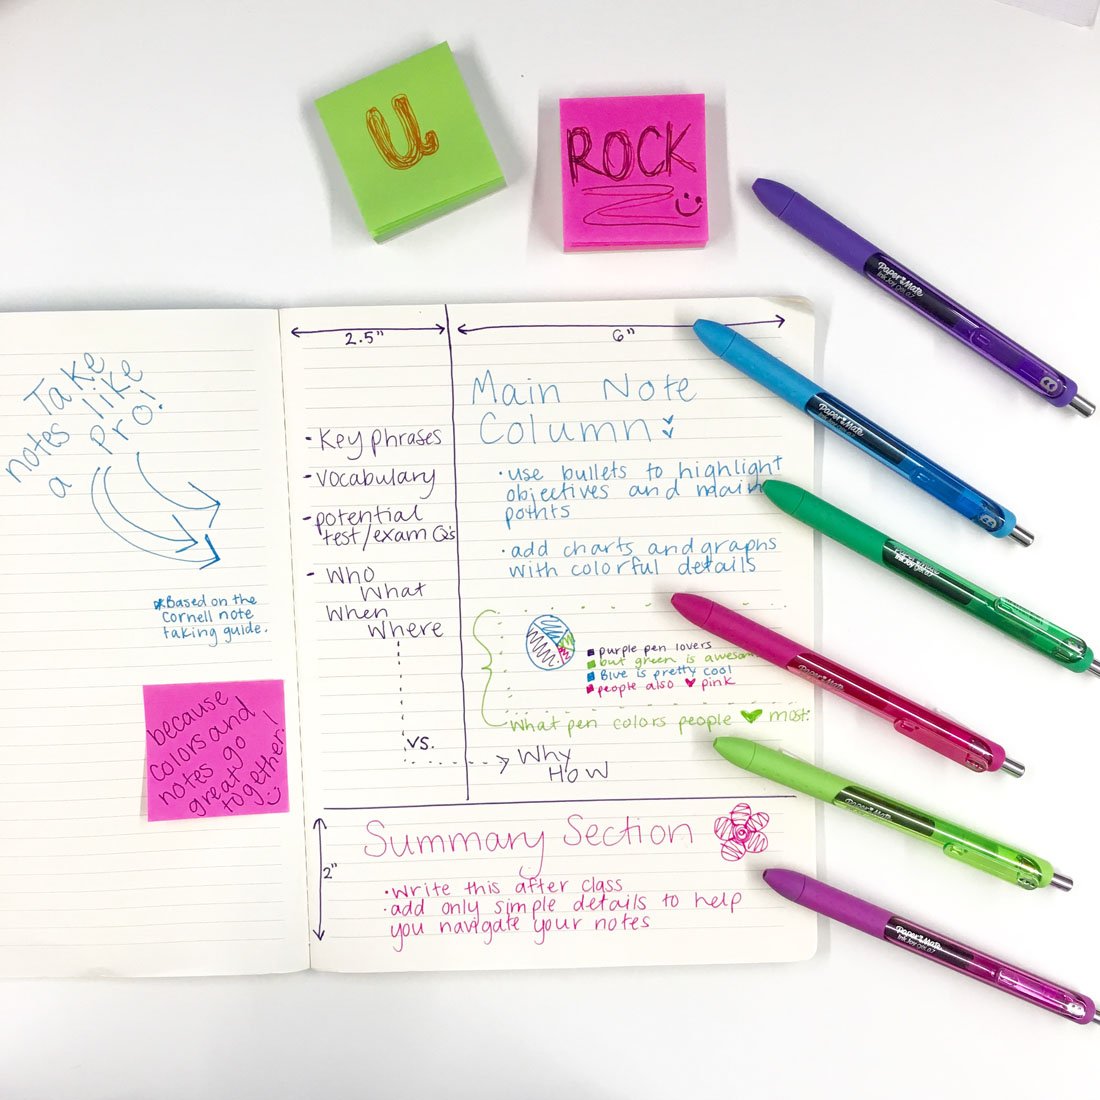 A guide to good note-taking pens!